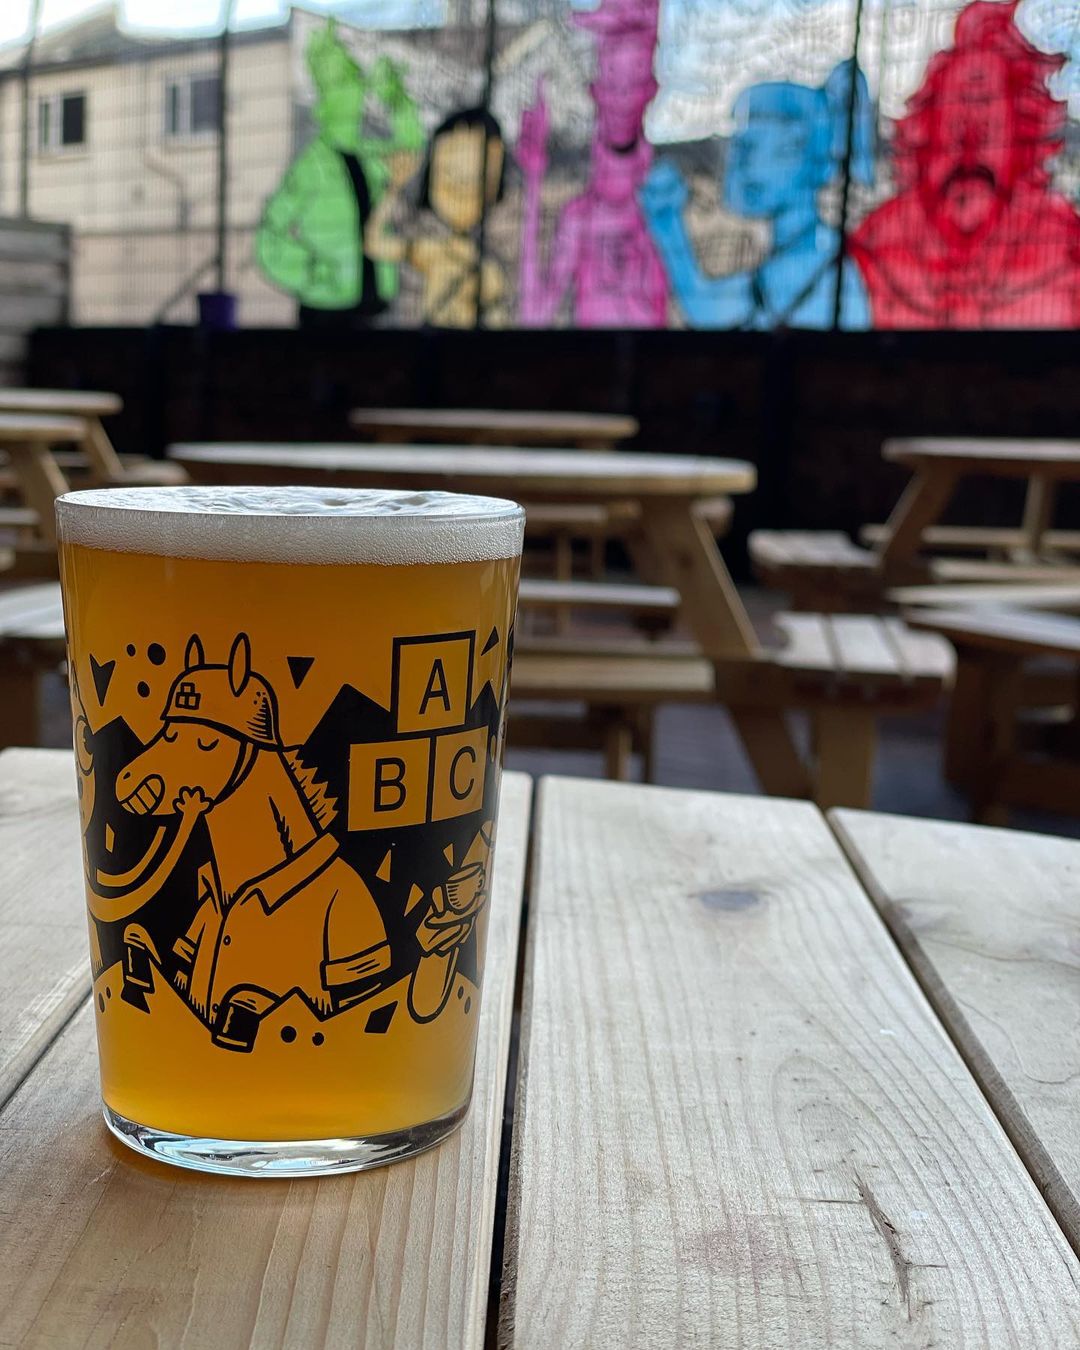 The Manchester taprooms serving up the freshest pints in the city, The Manc